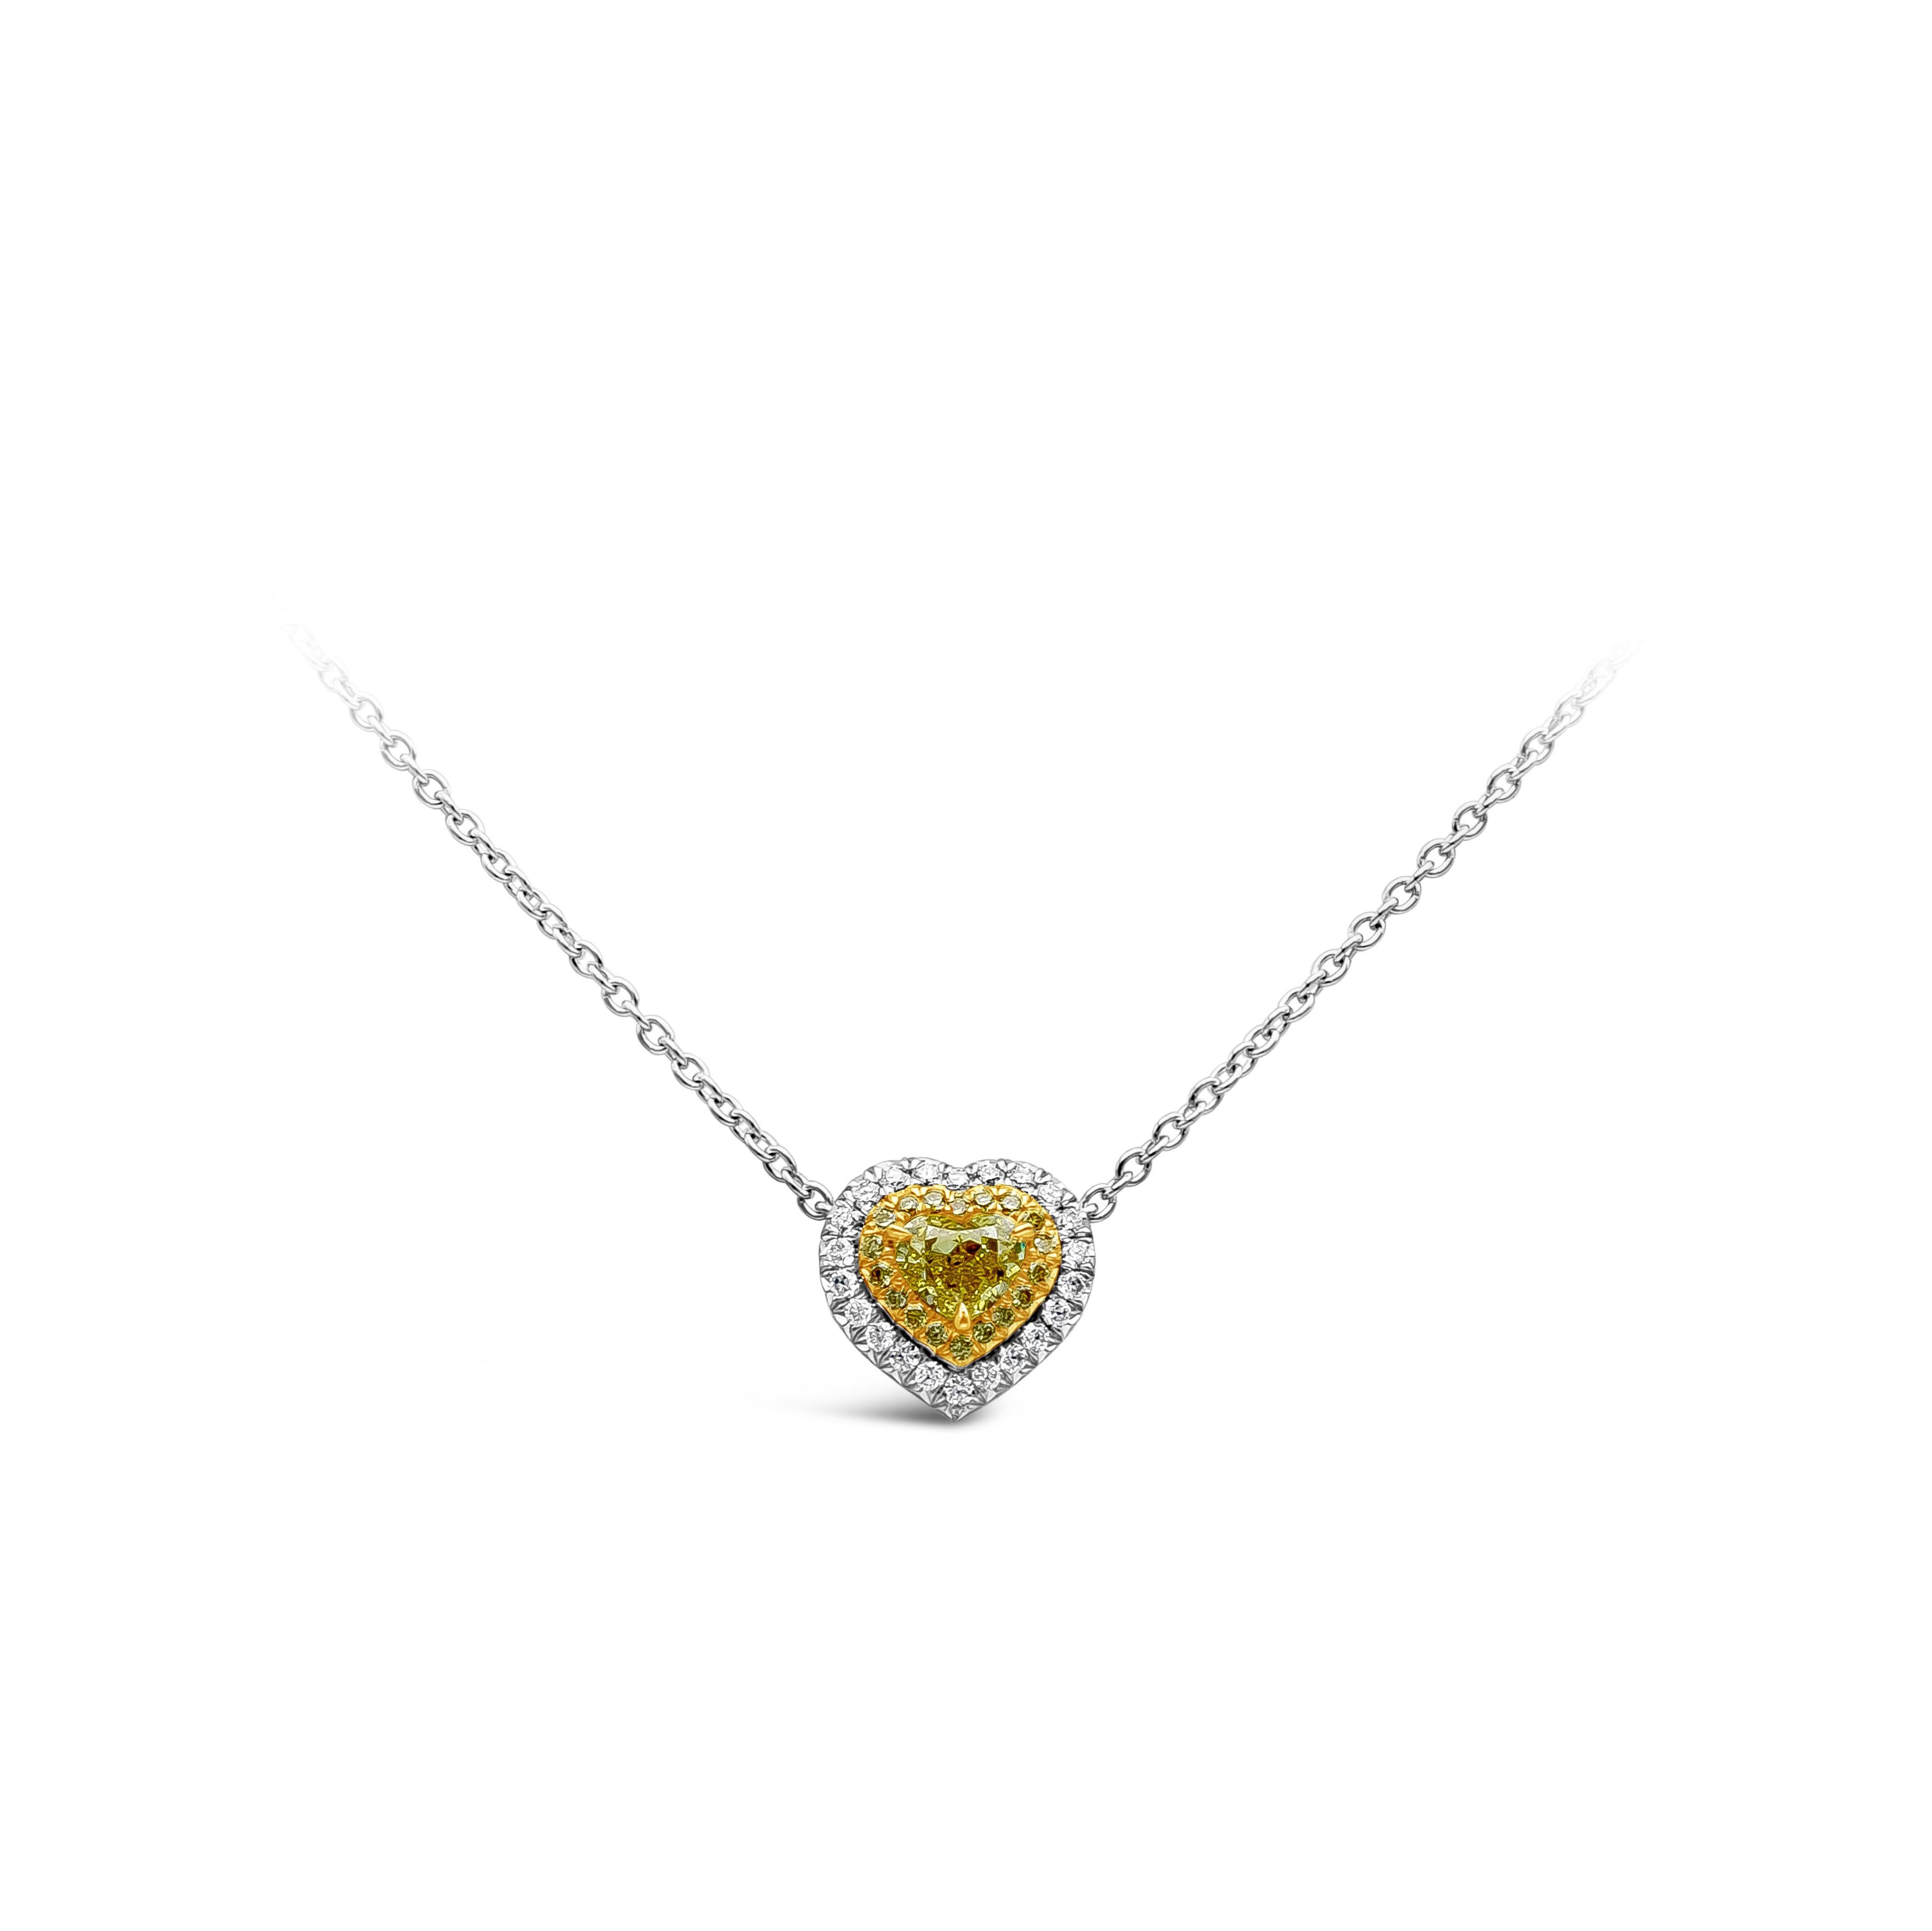 This beautiful pendant features a yellow heart-shape diamond weighing 0.50 carats and has a VS clarity. It is accented by a row of 40 round brilliant diamonds, 18 yellow round and 22 white round respectively, set all around the center stone. Yellow